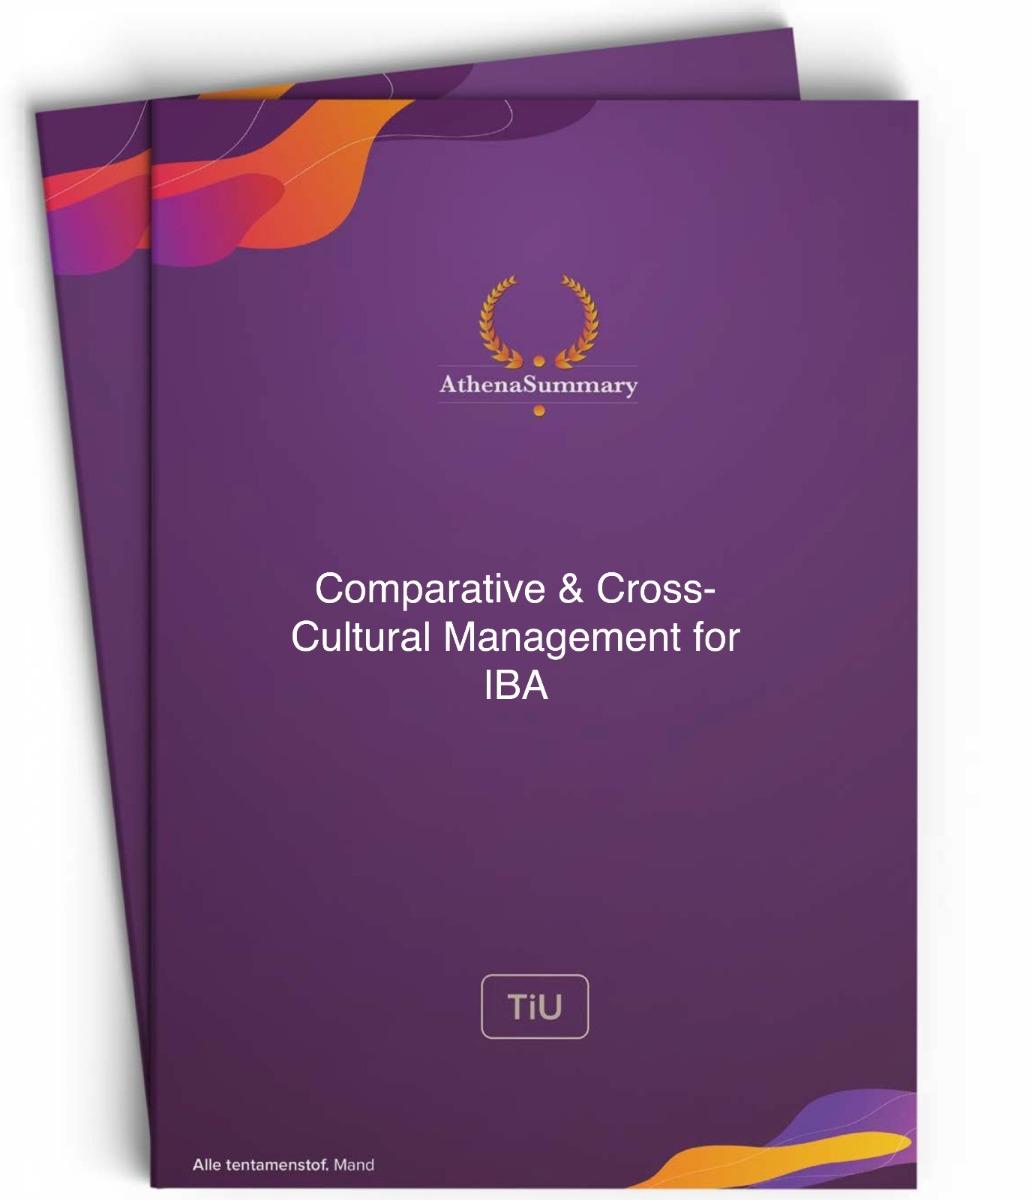 Literature and Lecture Summary: Comparative and Cross-Cultural Management for IBA